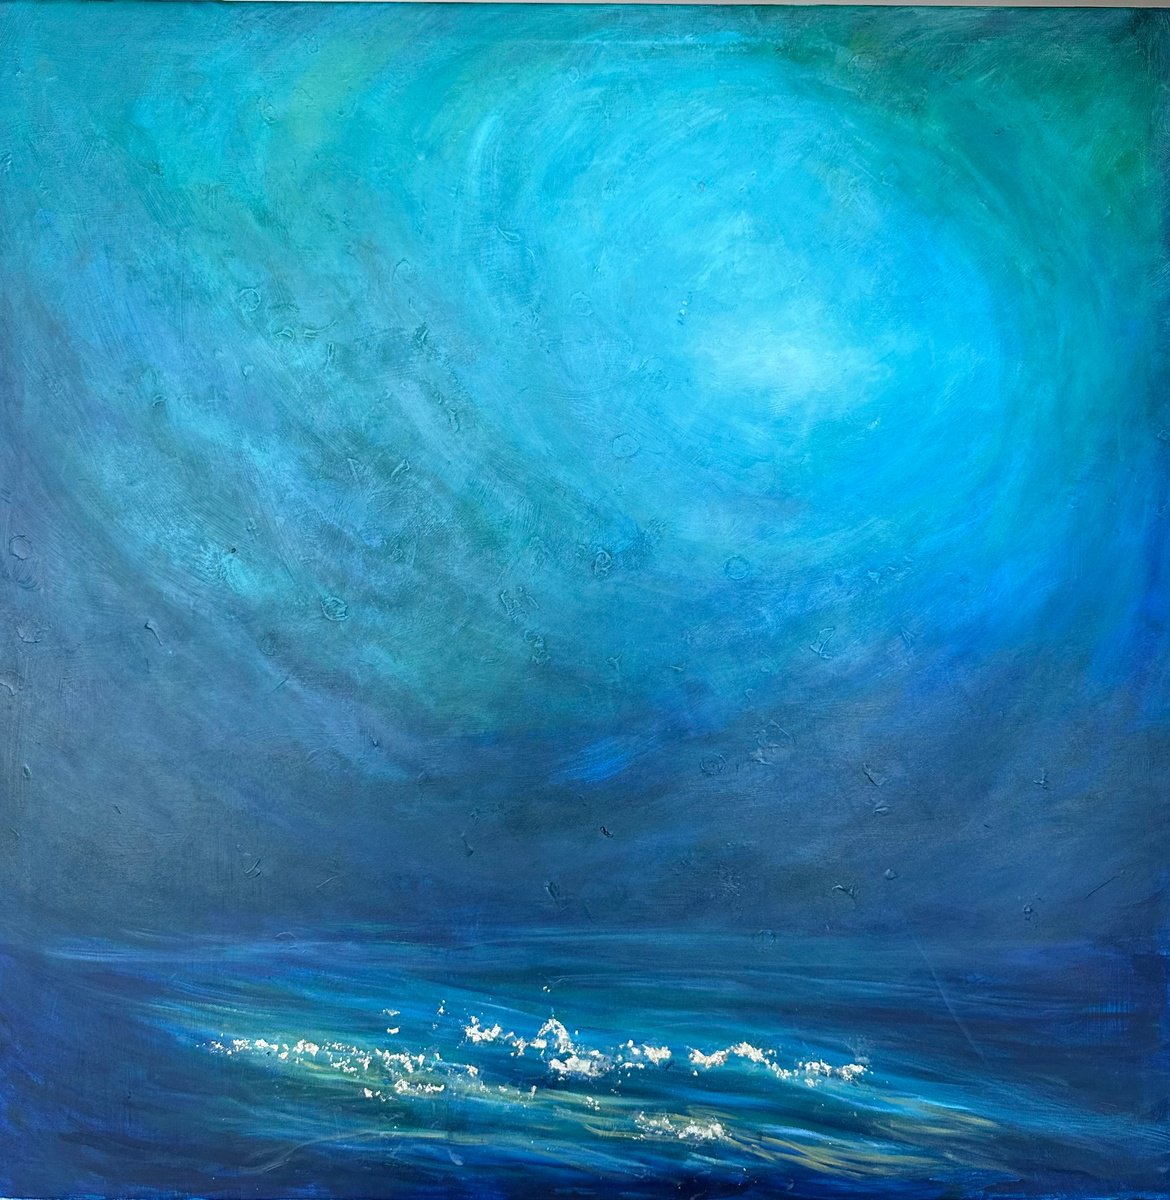 Night Sea Sparkles by Clare Hoath